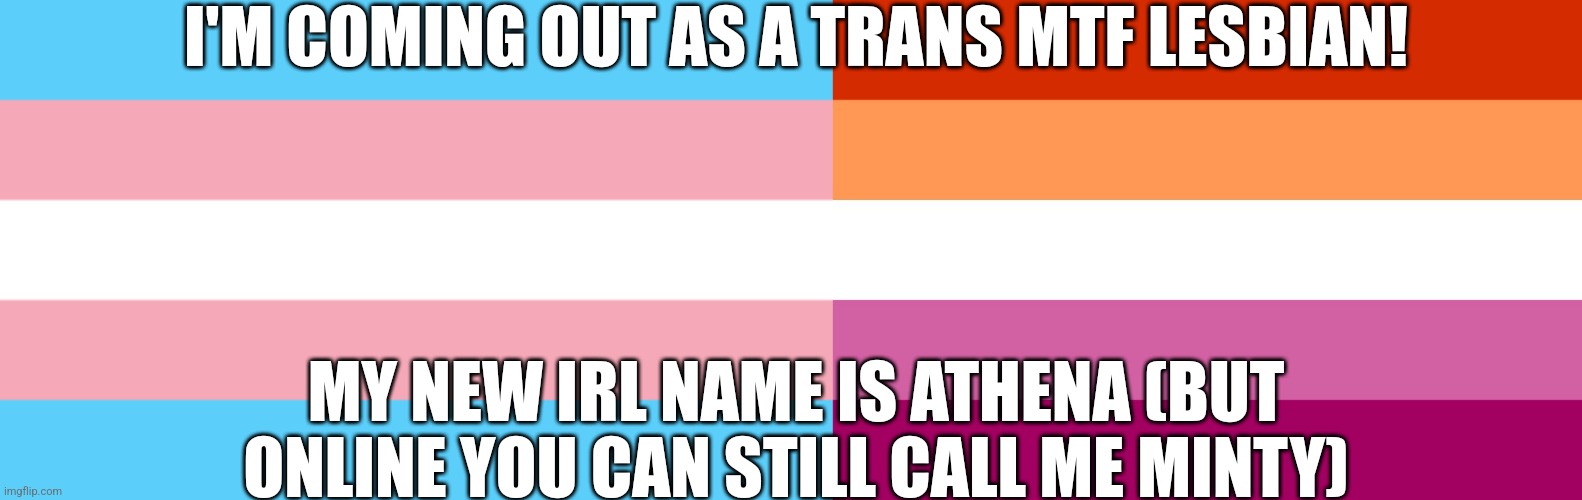 I'M COMING OUT AS A TRANS MTF LESBIAN! MY NEW IRL NAME IS ATHENA (BUT ONLINE YOU CAN STILL CALL ME MINTY) | image tagged in trans flag,lesbian flag | made w/ Imgflip meme maker